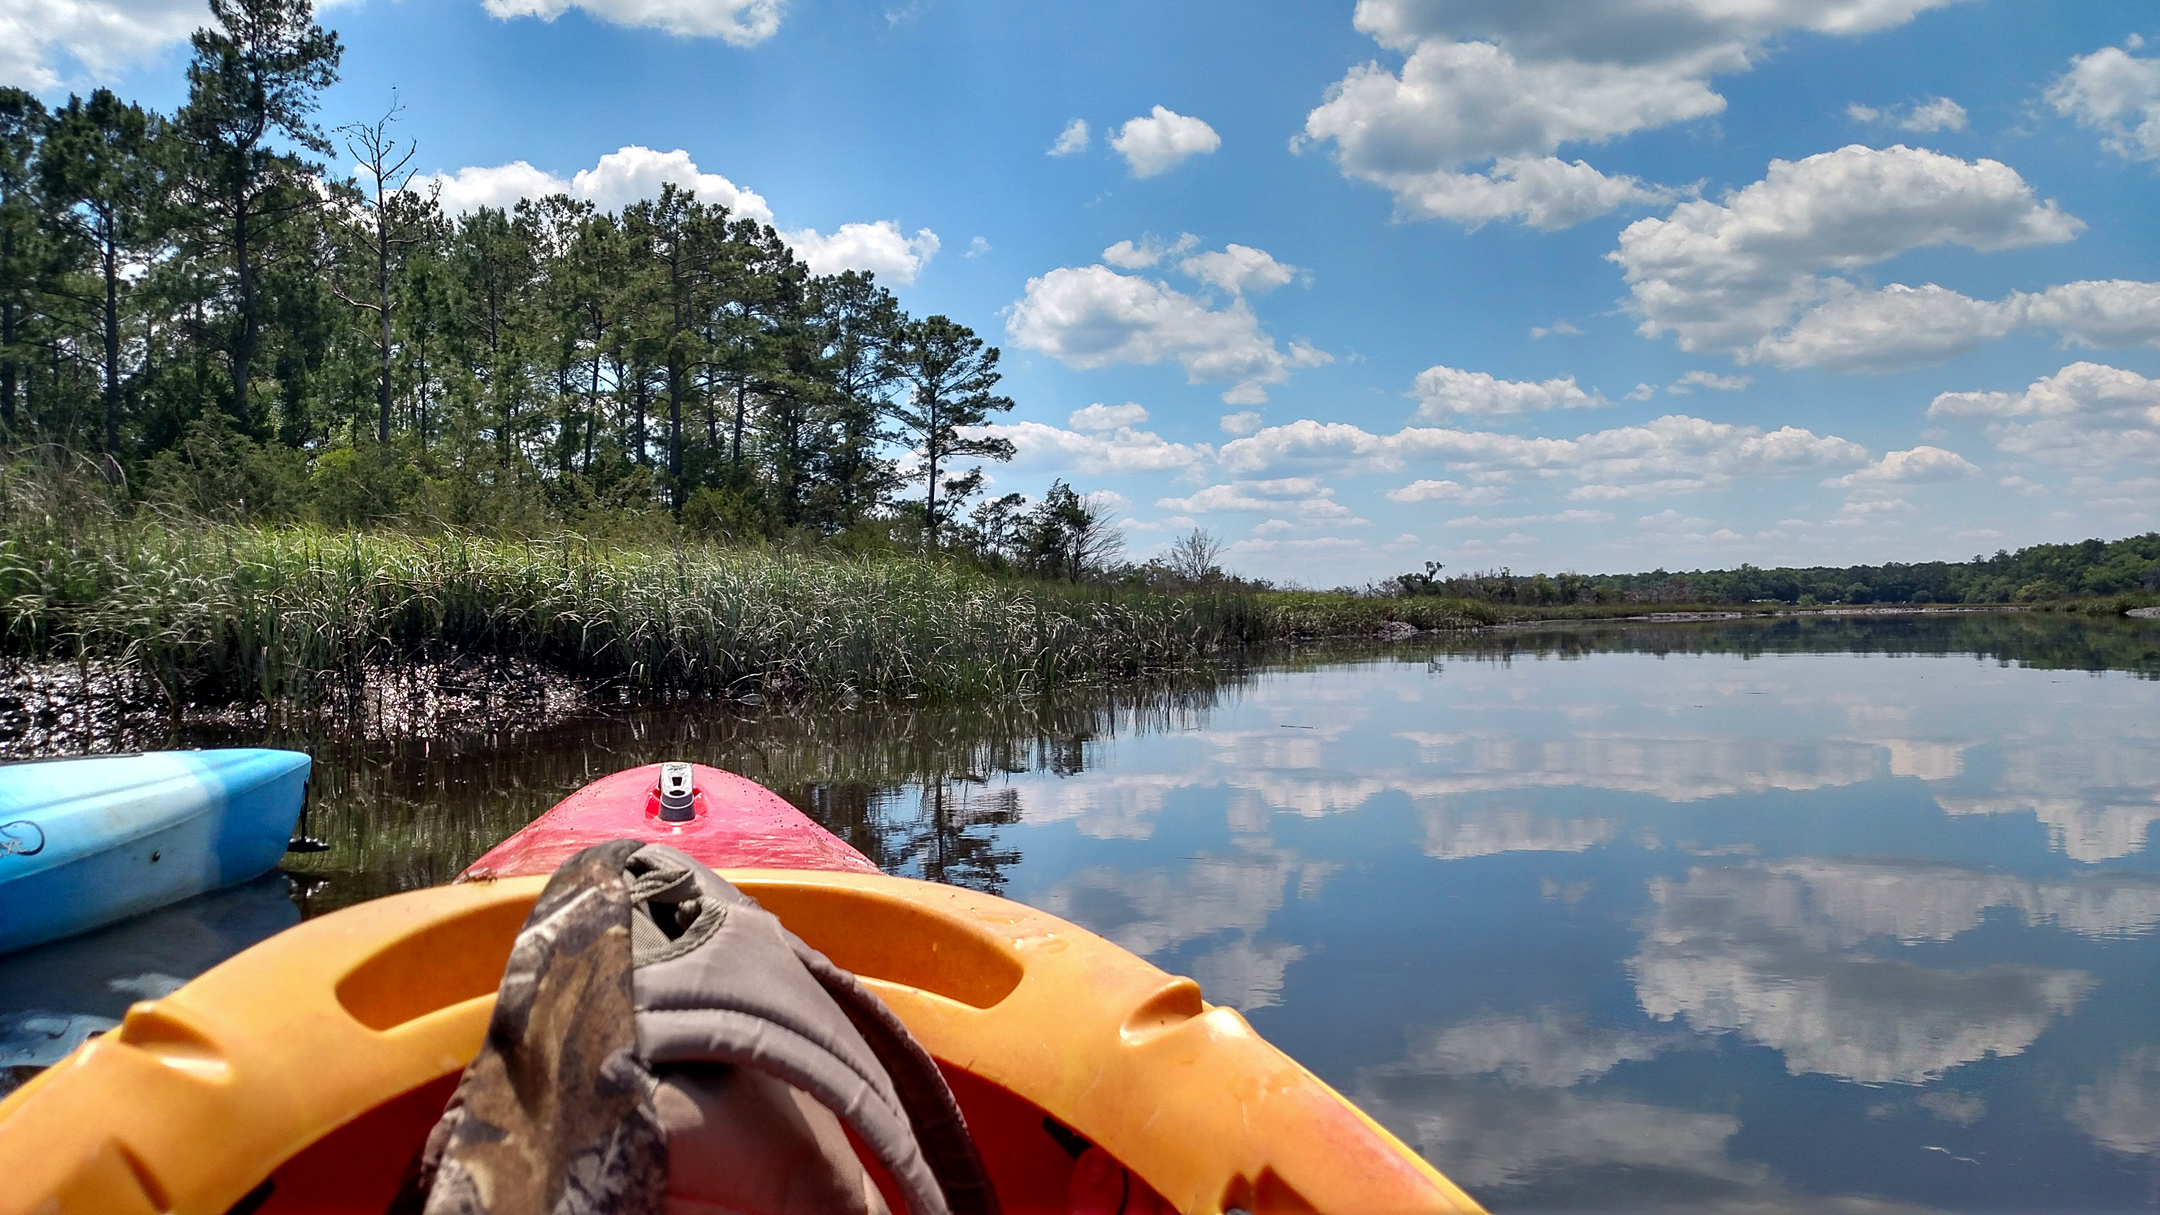 Get your paddle ready and keep reading to check out our list of the best spots to launch your kayak in Liberty County.